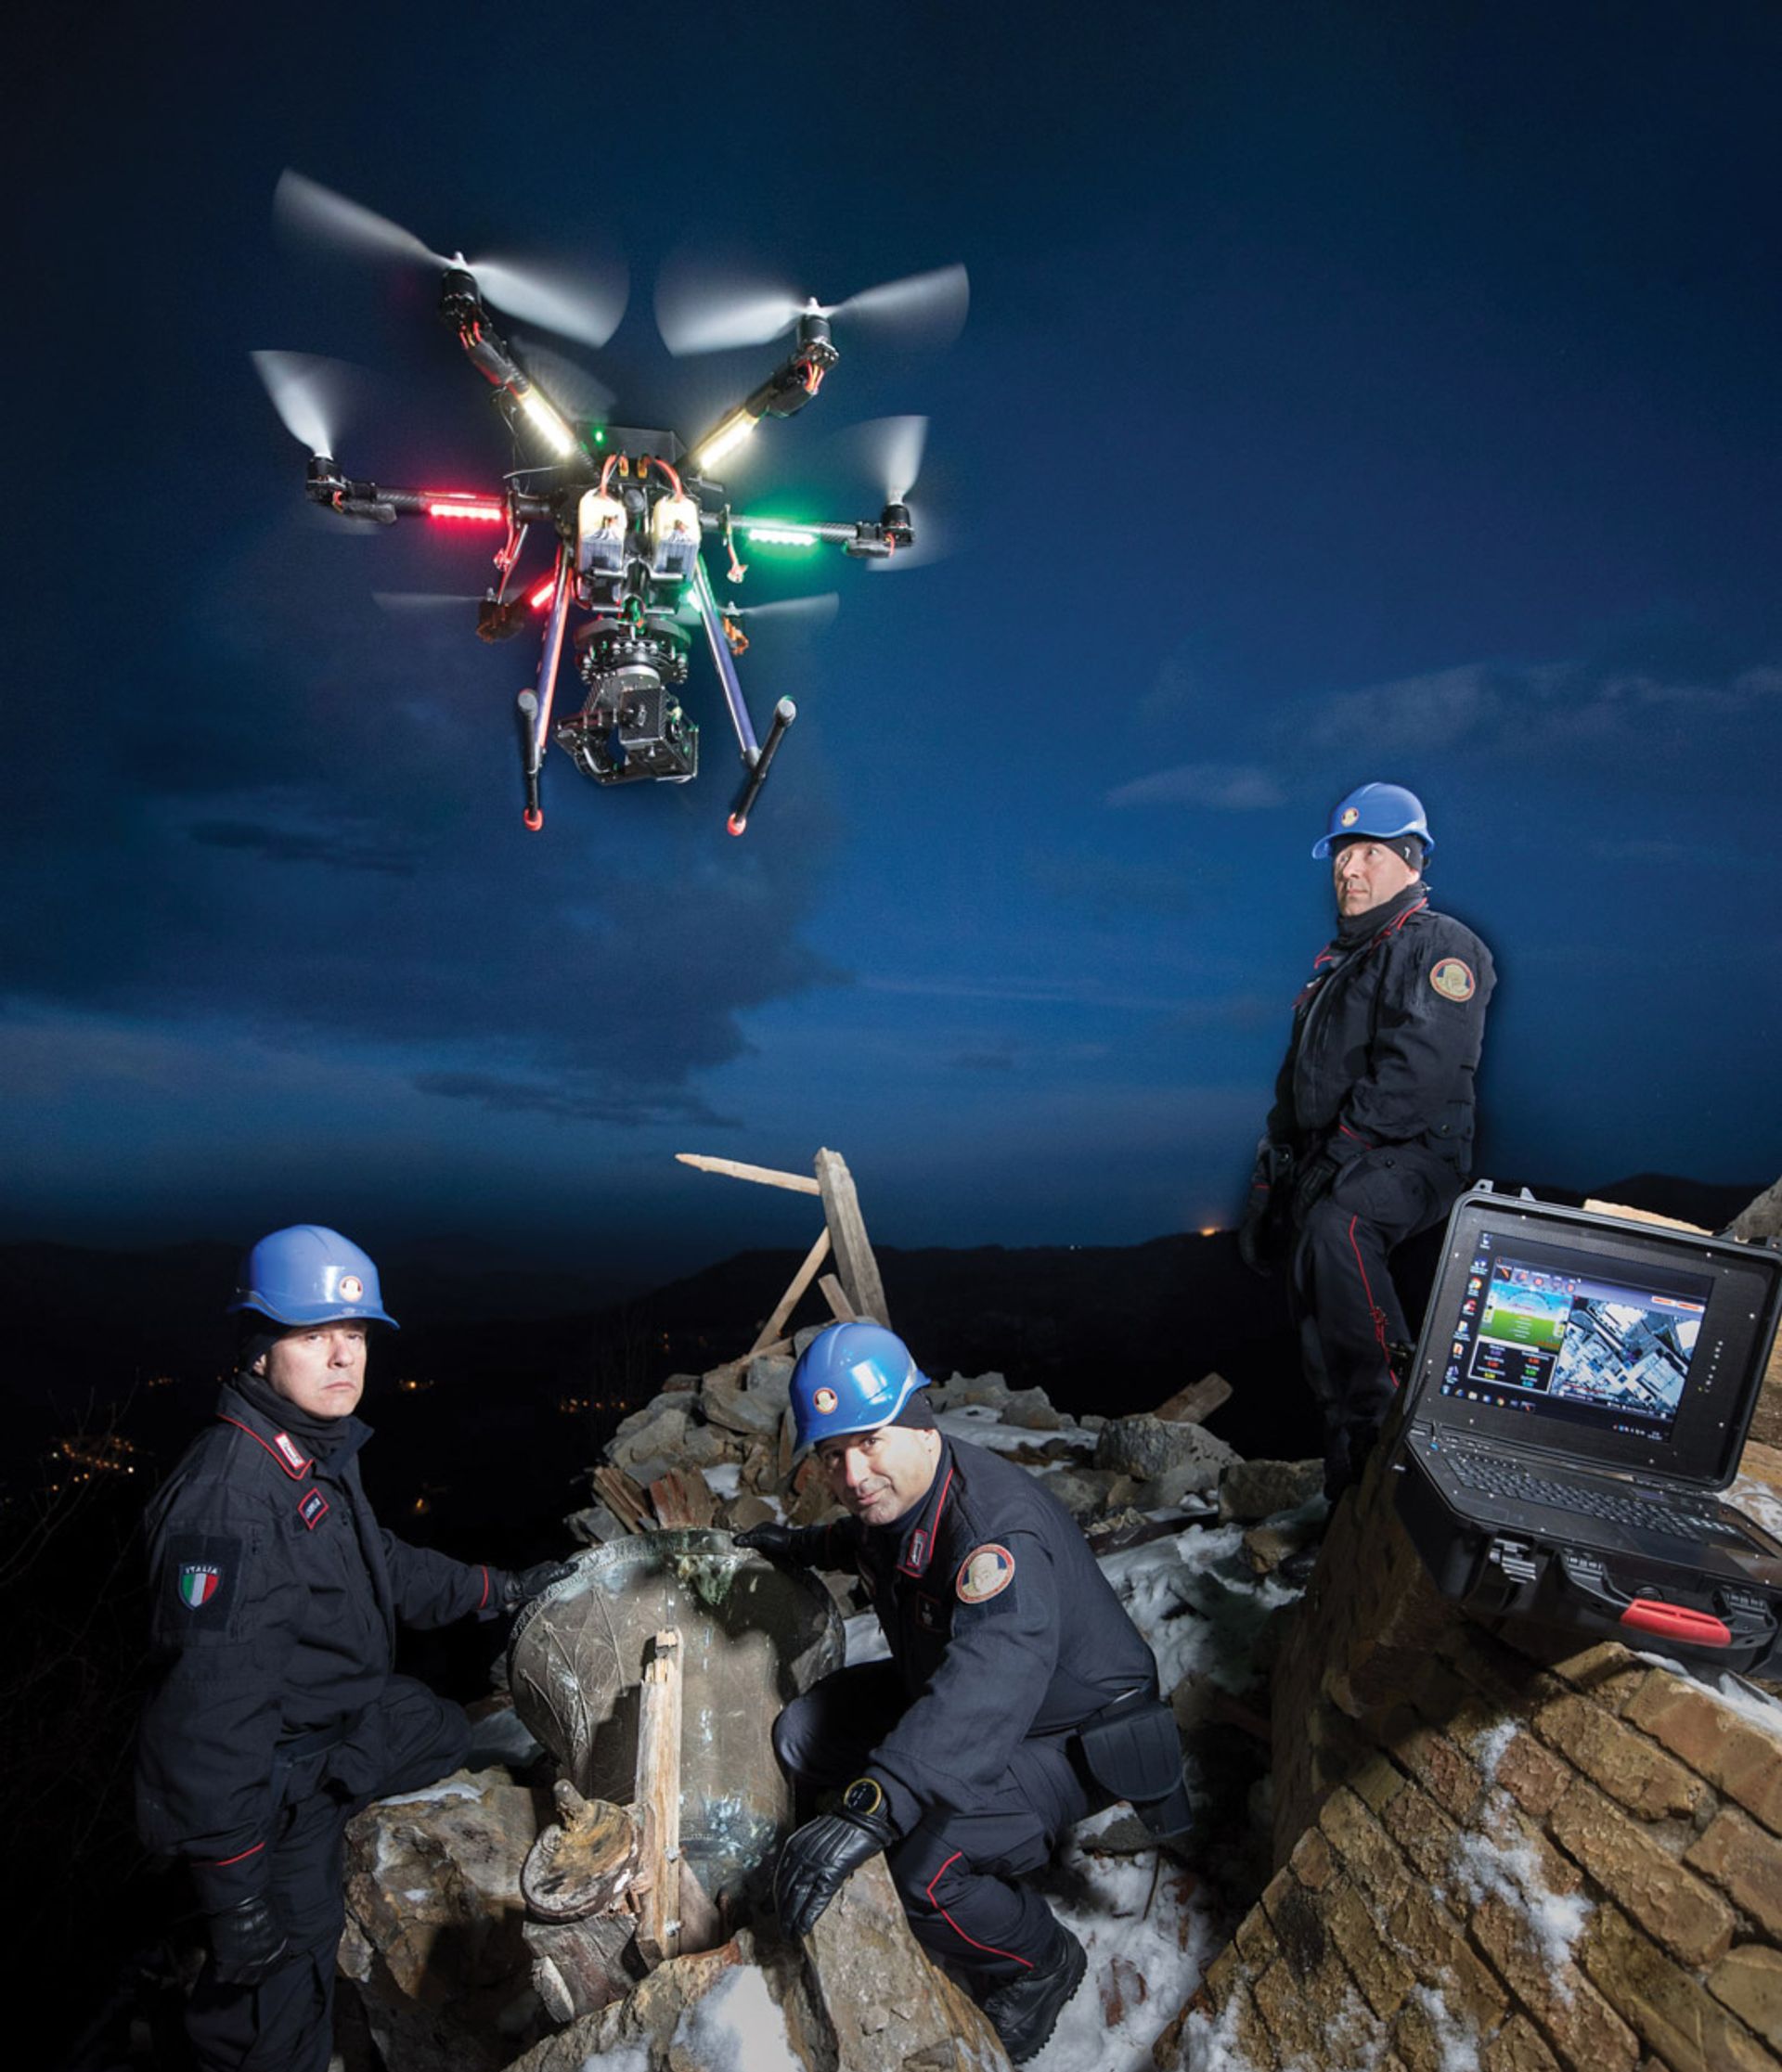 Eye in the sky: the carabinieri are now using drones to help their investigations © Carabinieri TPC